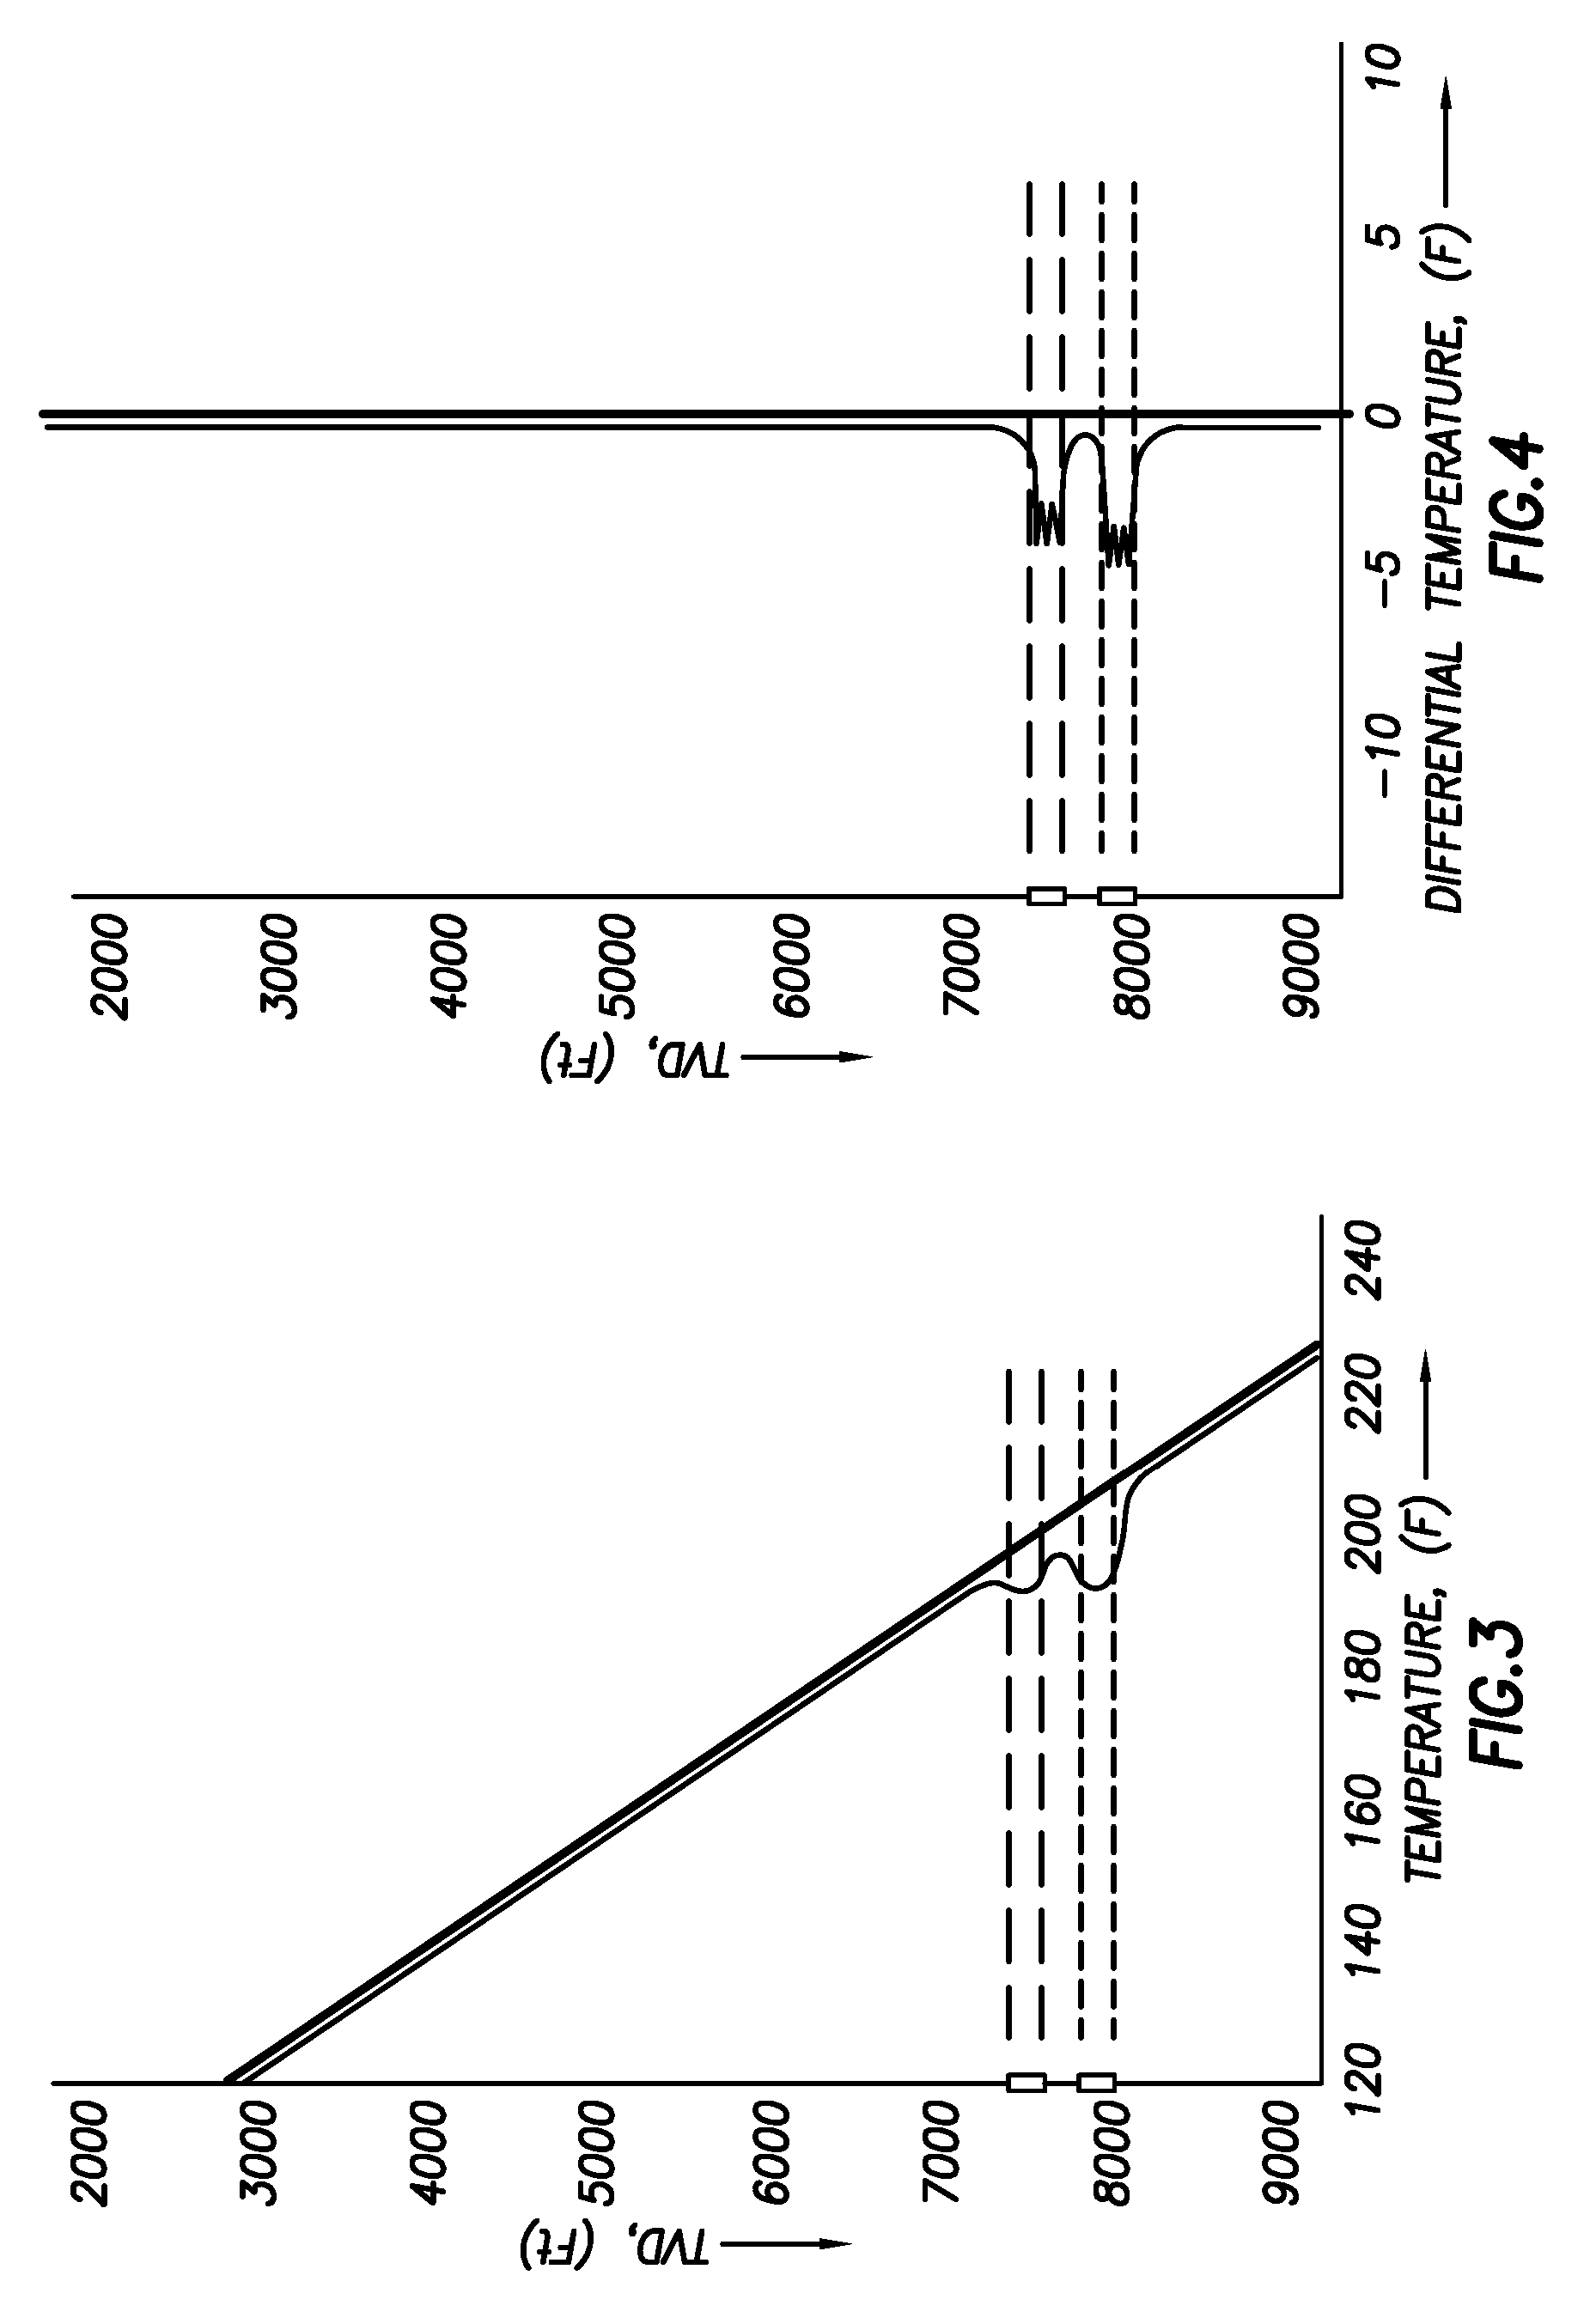 Use of distributed temperature sensors during wellbore treatments